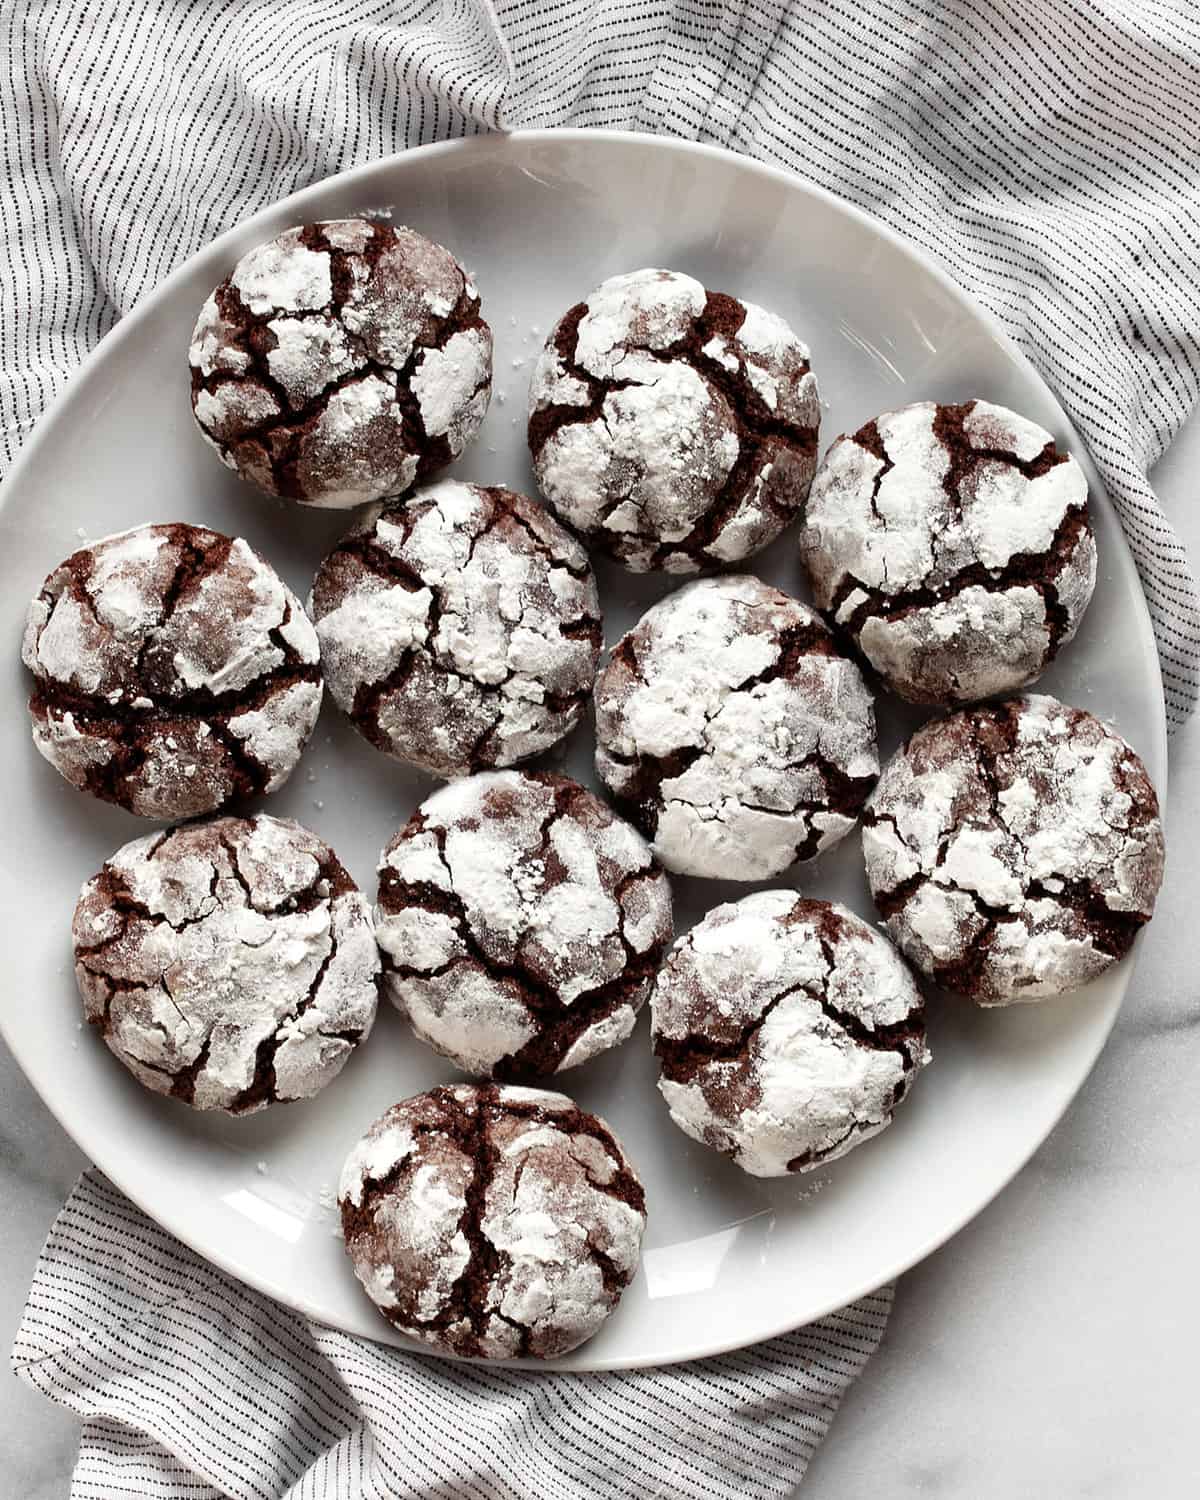 Chocolate crinkle cookies on a serving plate.